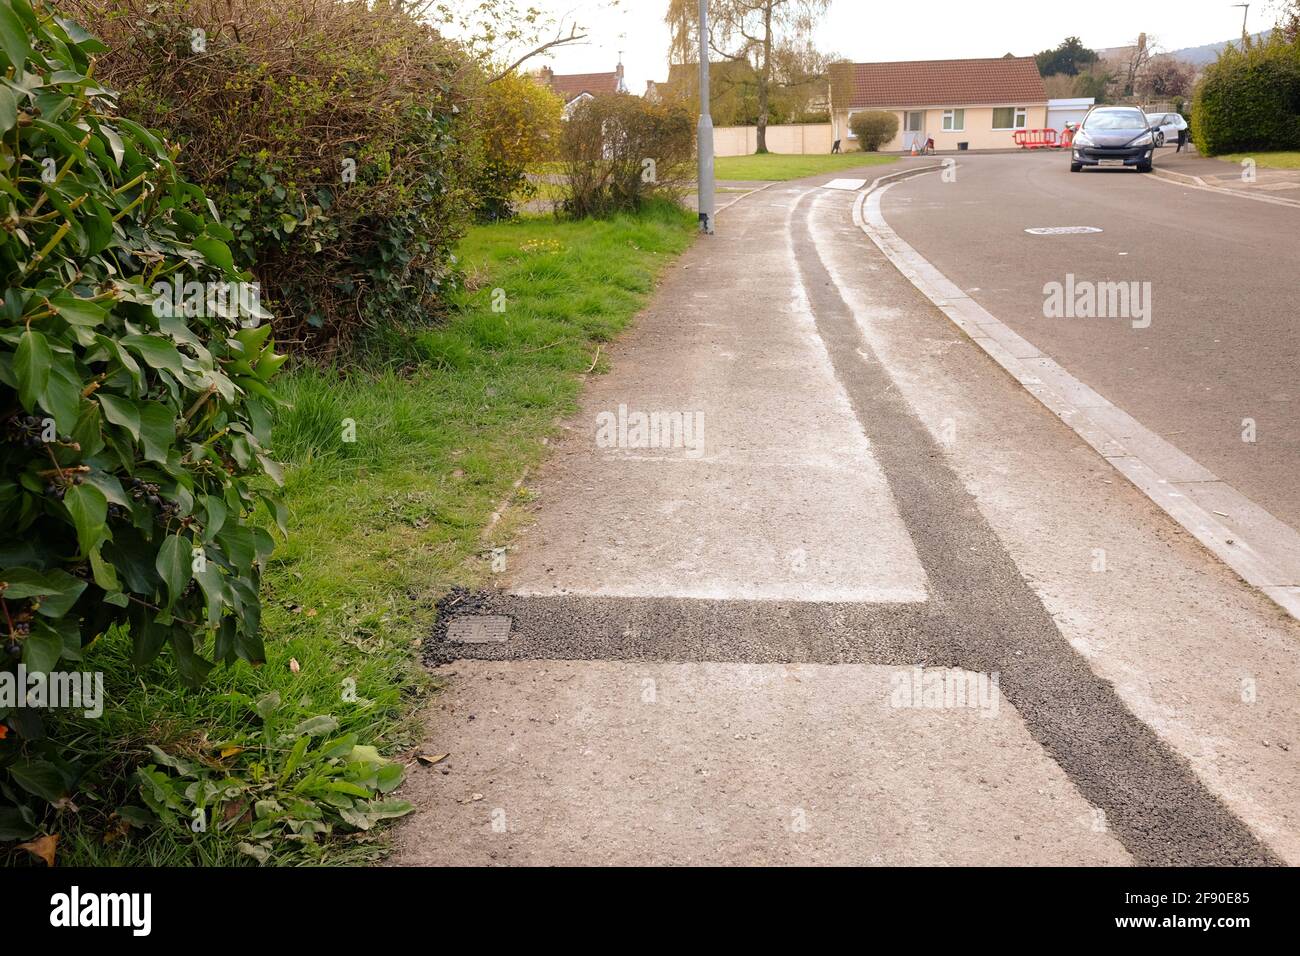 April 2021 - Repairs to sidewalk pavement in a residential for the installation of cable data network. Stock Photo